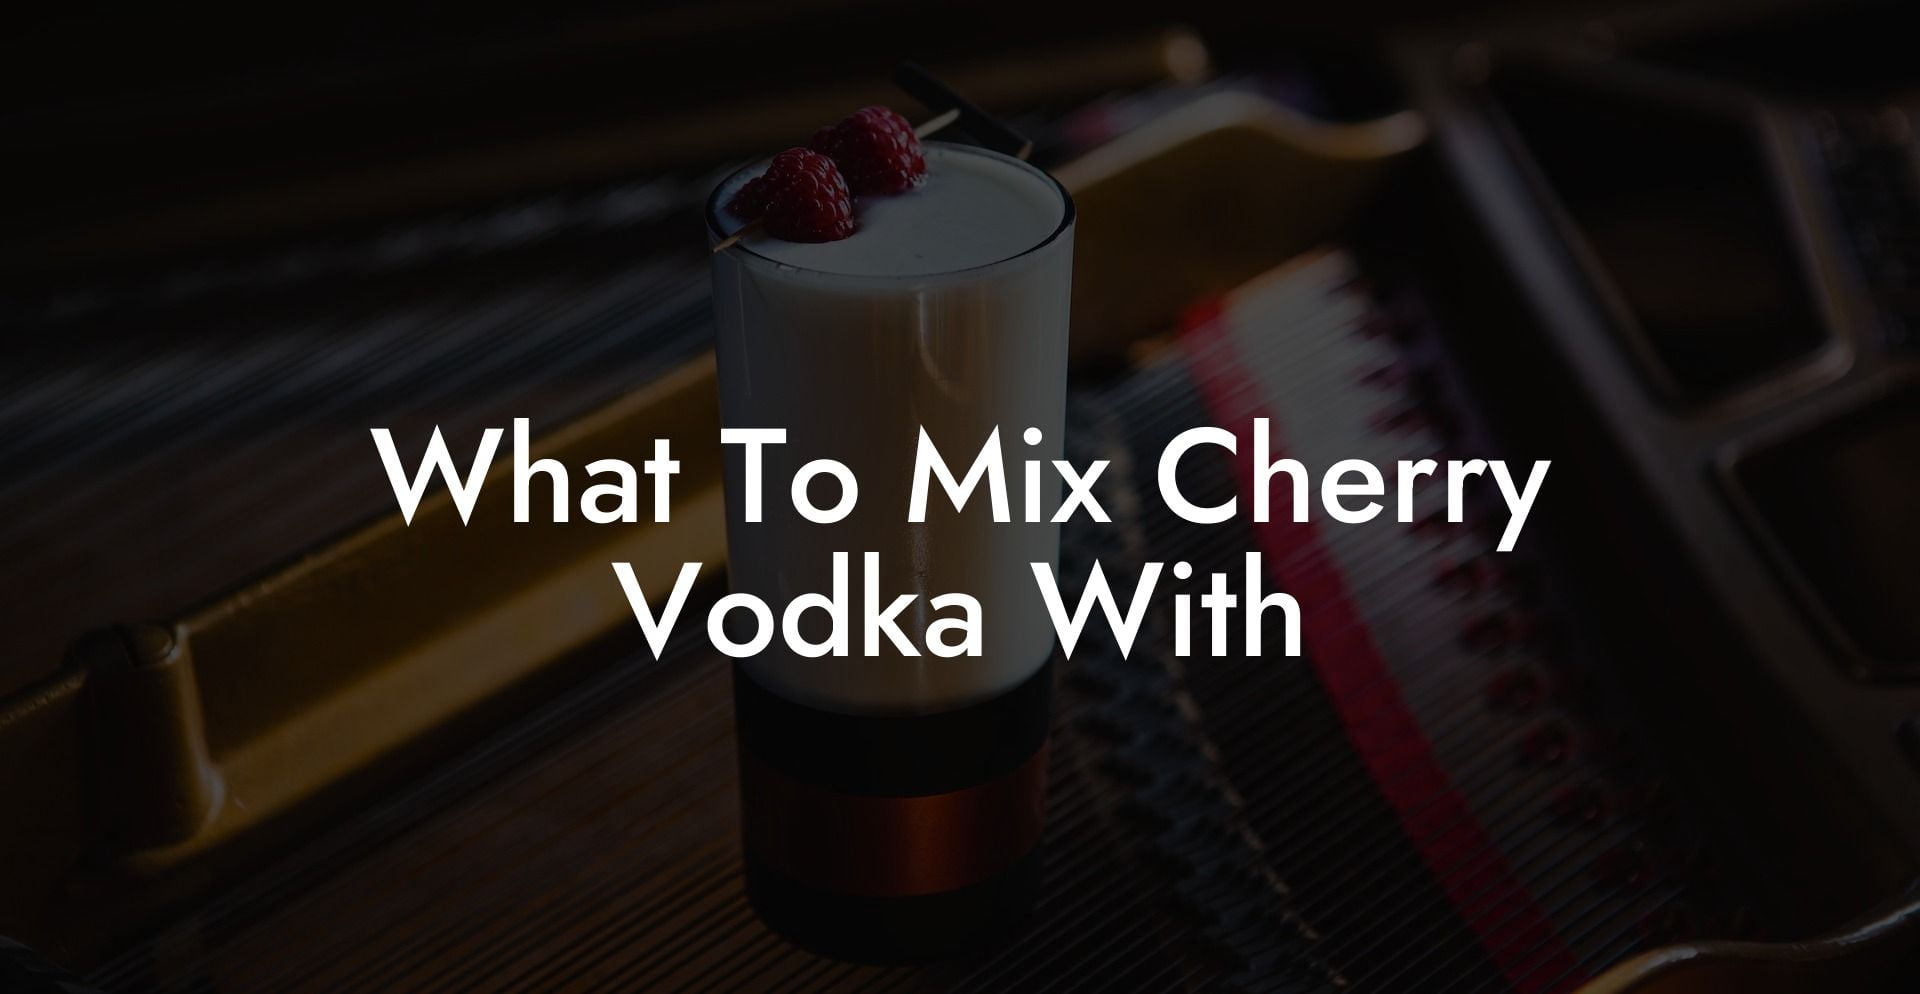 What To Mix Cherry Vodka With